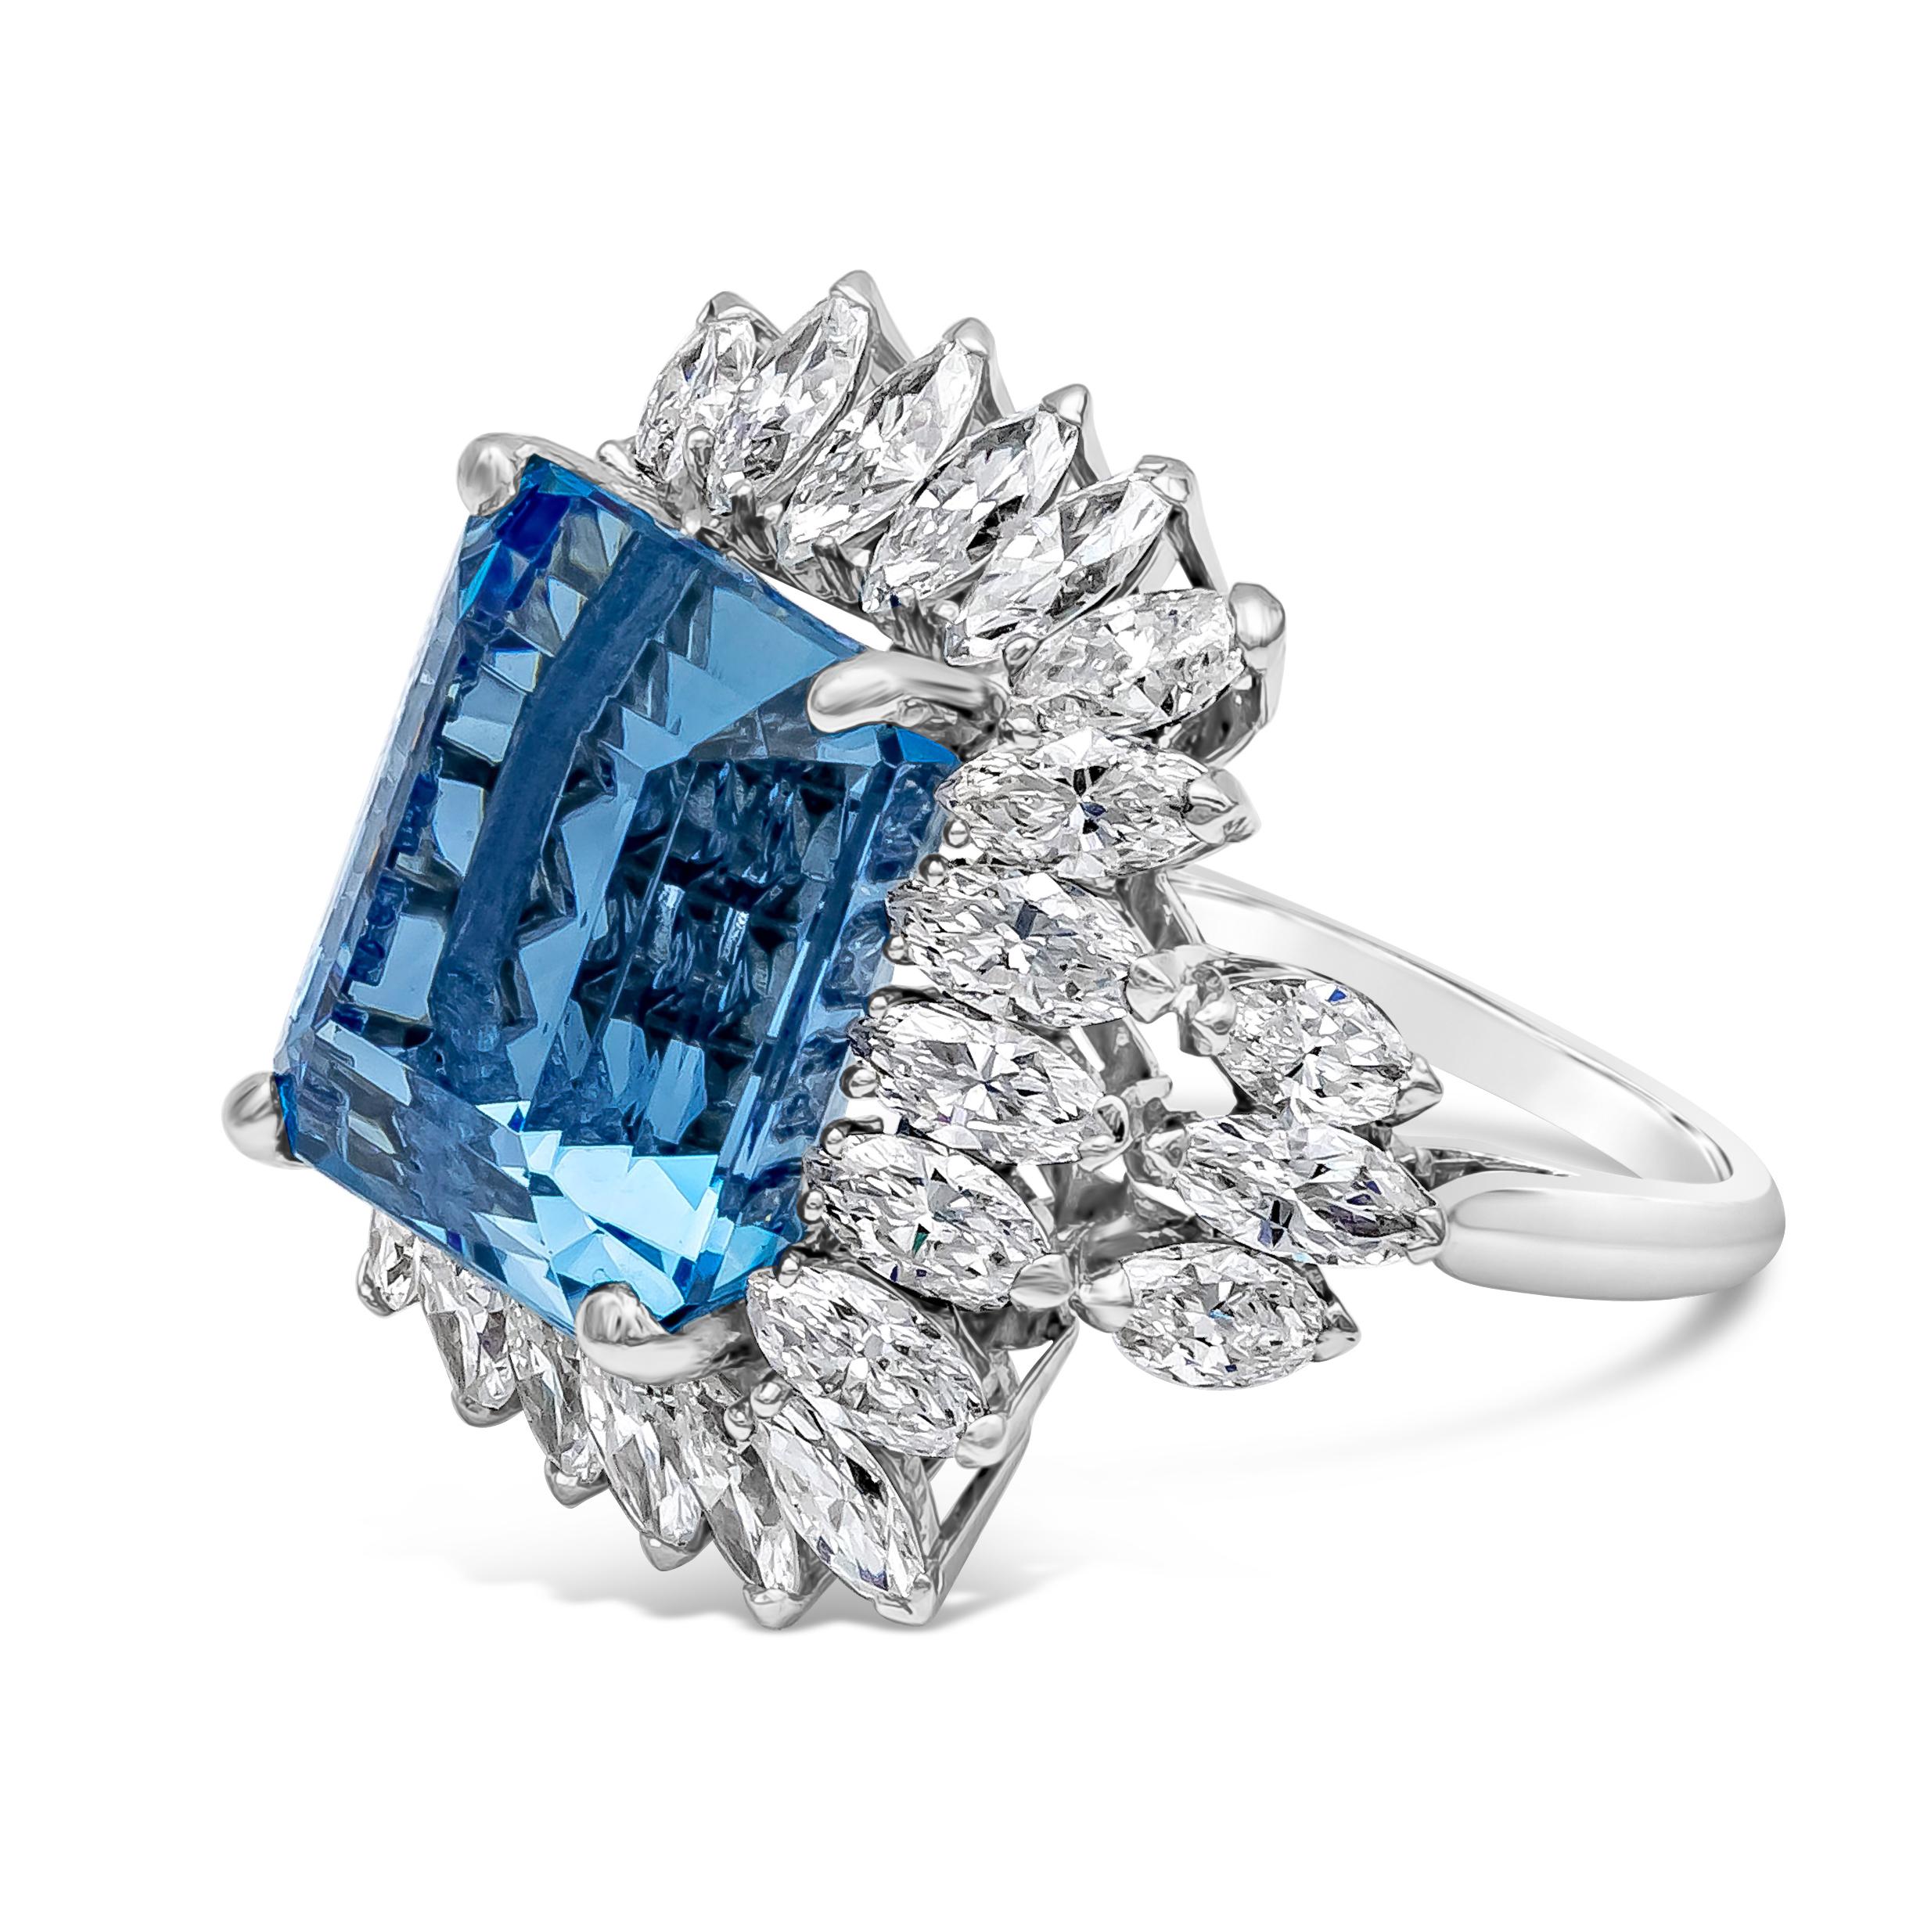 Showcasing an emerald cut 11.48 carat blue aquamarine in 4 prong setting. Surrounded by 28 sparkling marquise cut diamond. Total weight of the diamonds is 4.36 carats. Made with Platinum. Size 6 US (Sizable upon request).

Roman Malakov is a custom